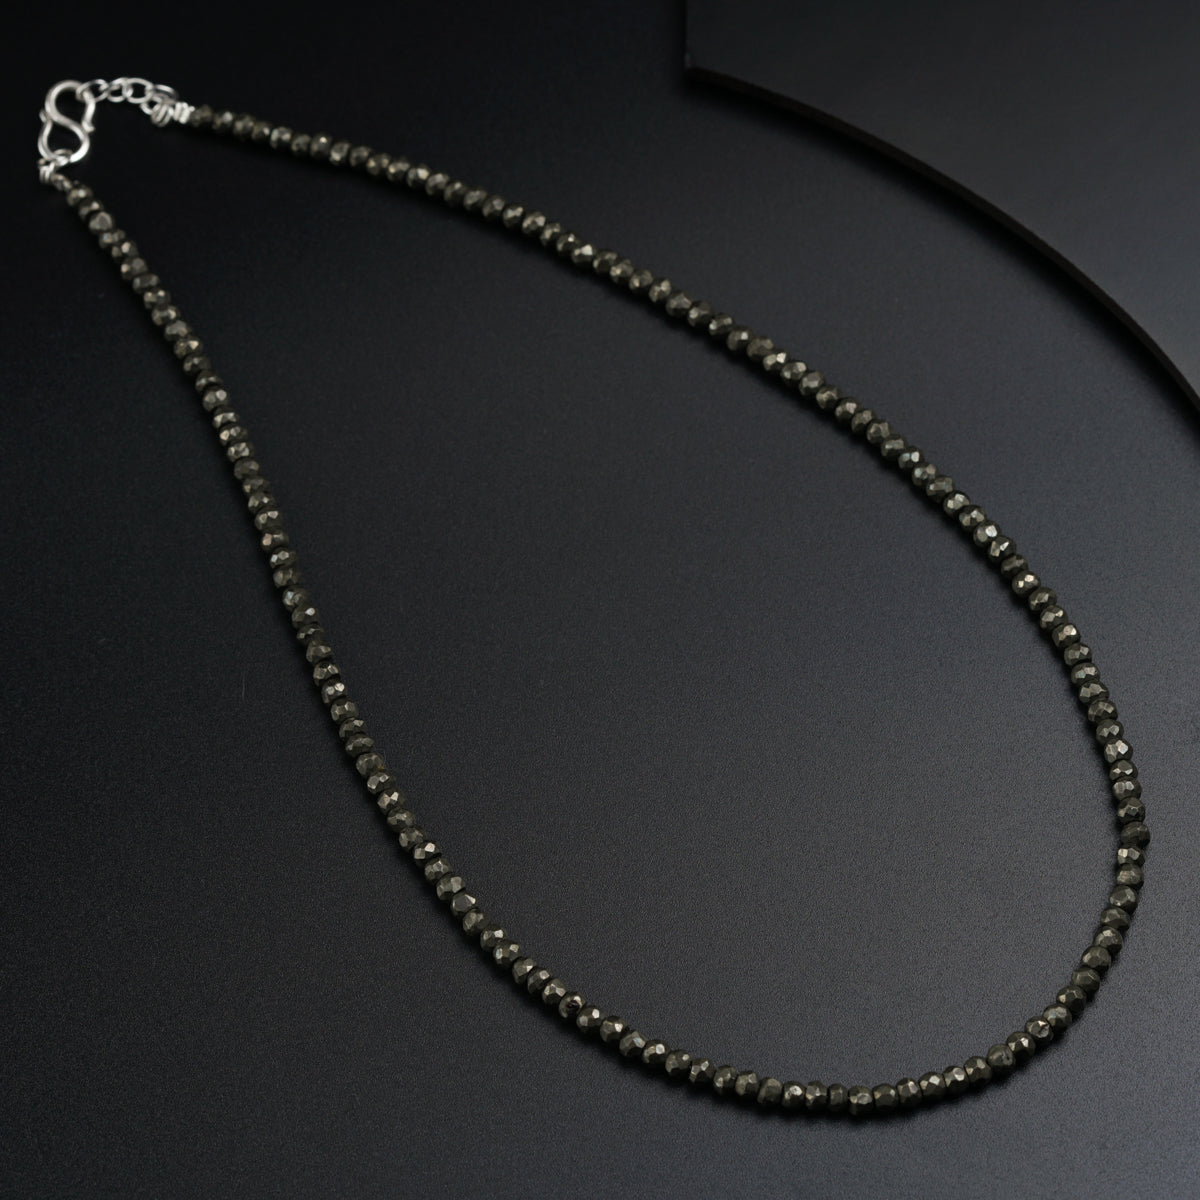 Daily Wear Necklace-Pyrite